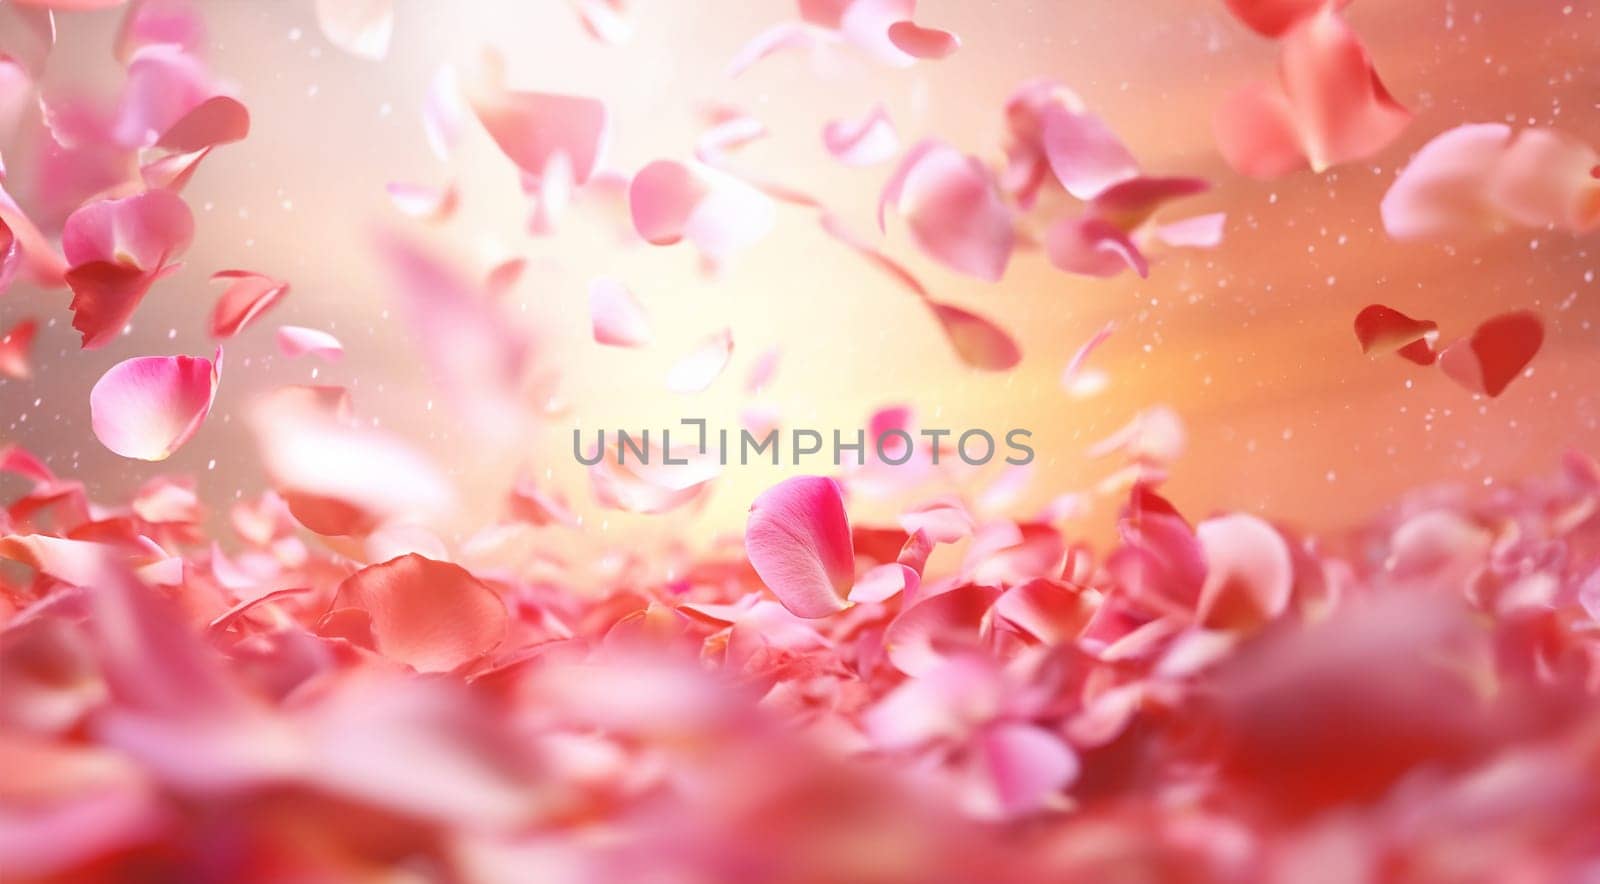 Pink rose petals on soft pink background. Petals of pink rose spa background. Realistic flying sakura cherry flower petals elements for romantic banner design. Copy space Valentine's Day concept. Space for text